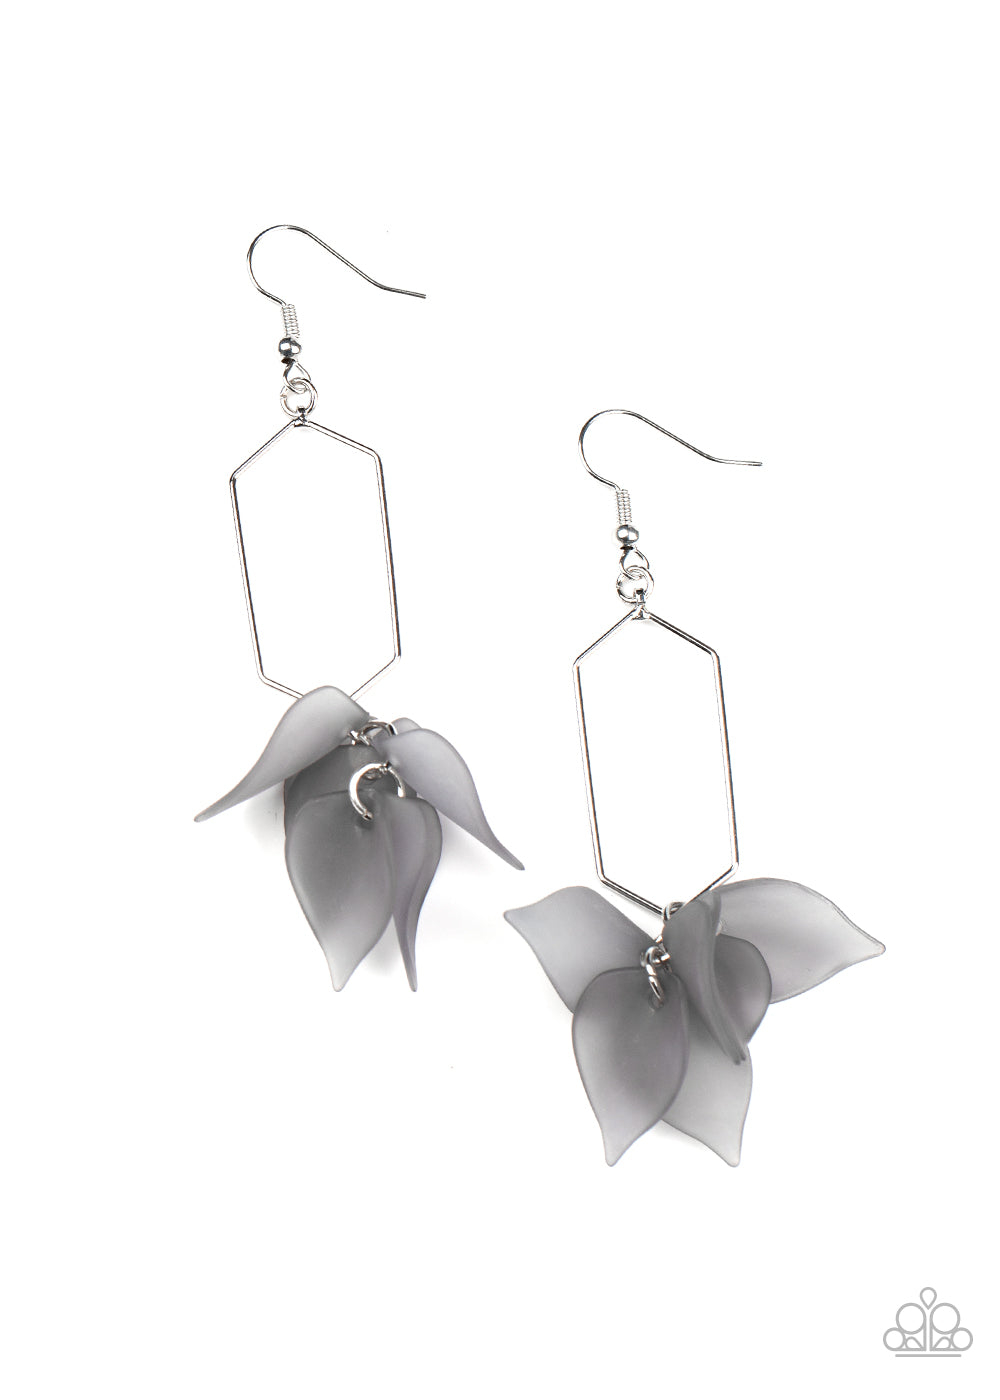 Extra Ethereal - Silver Paparazzi Earrings